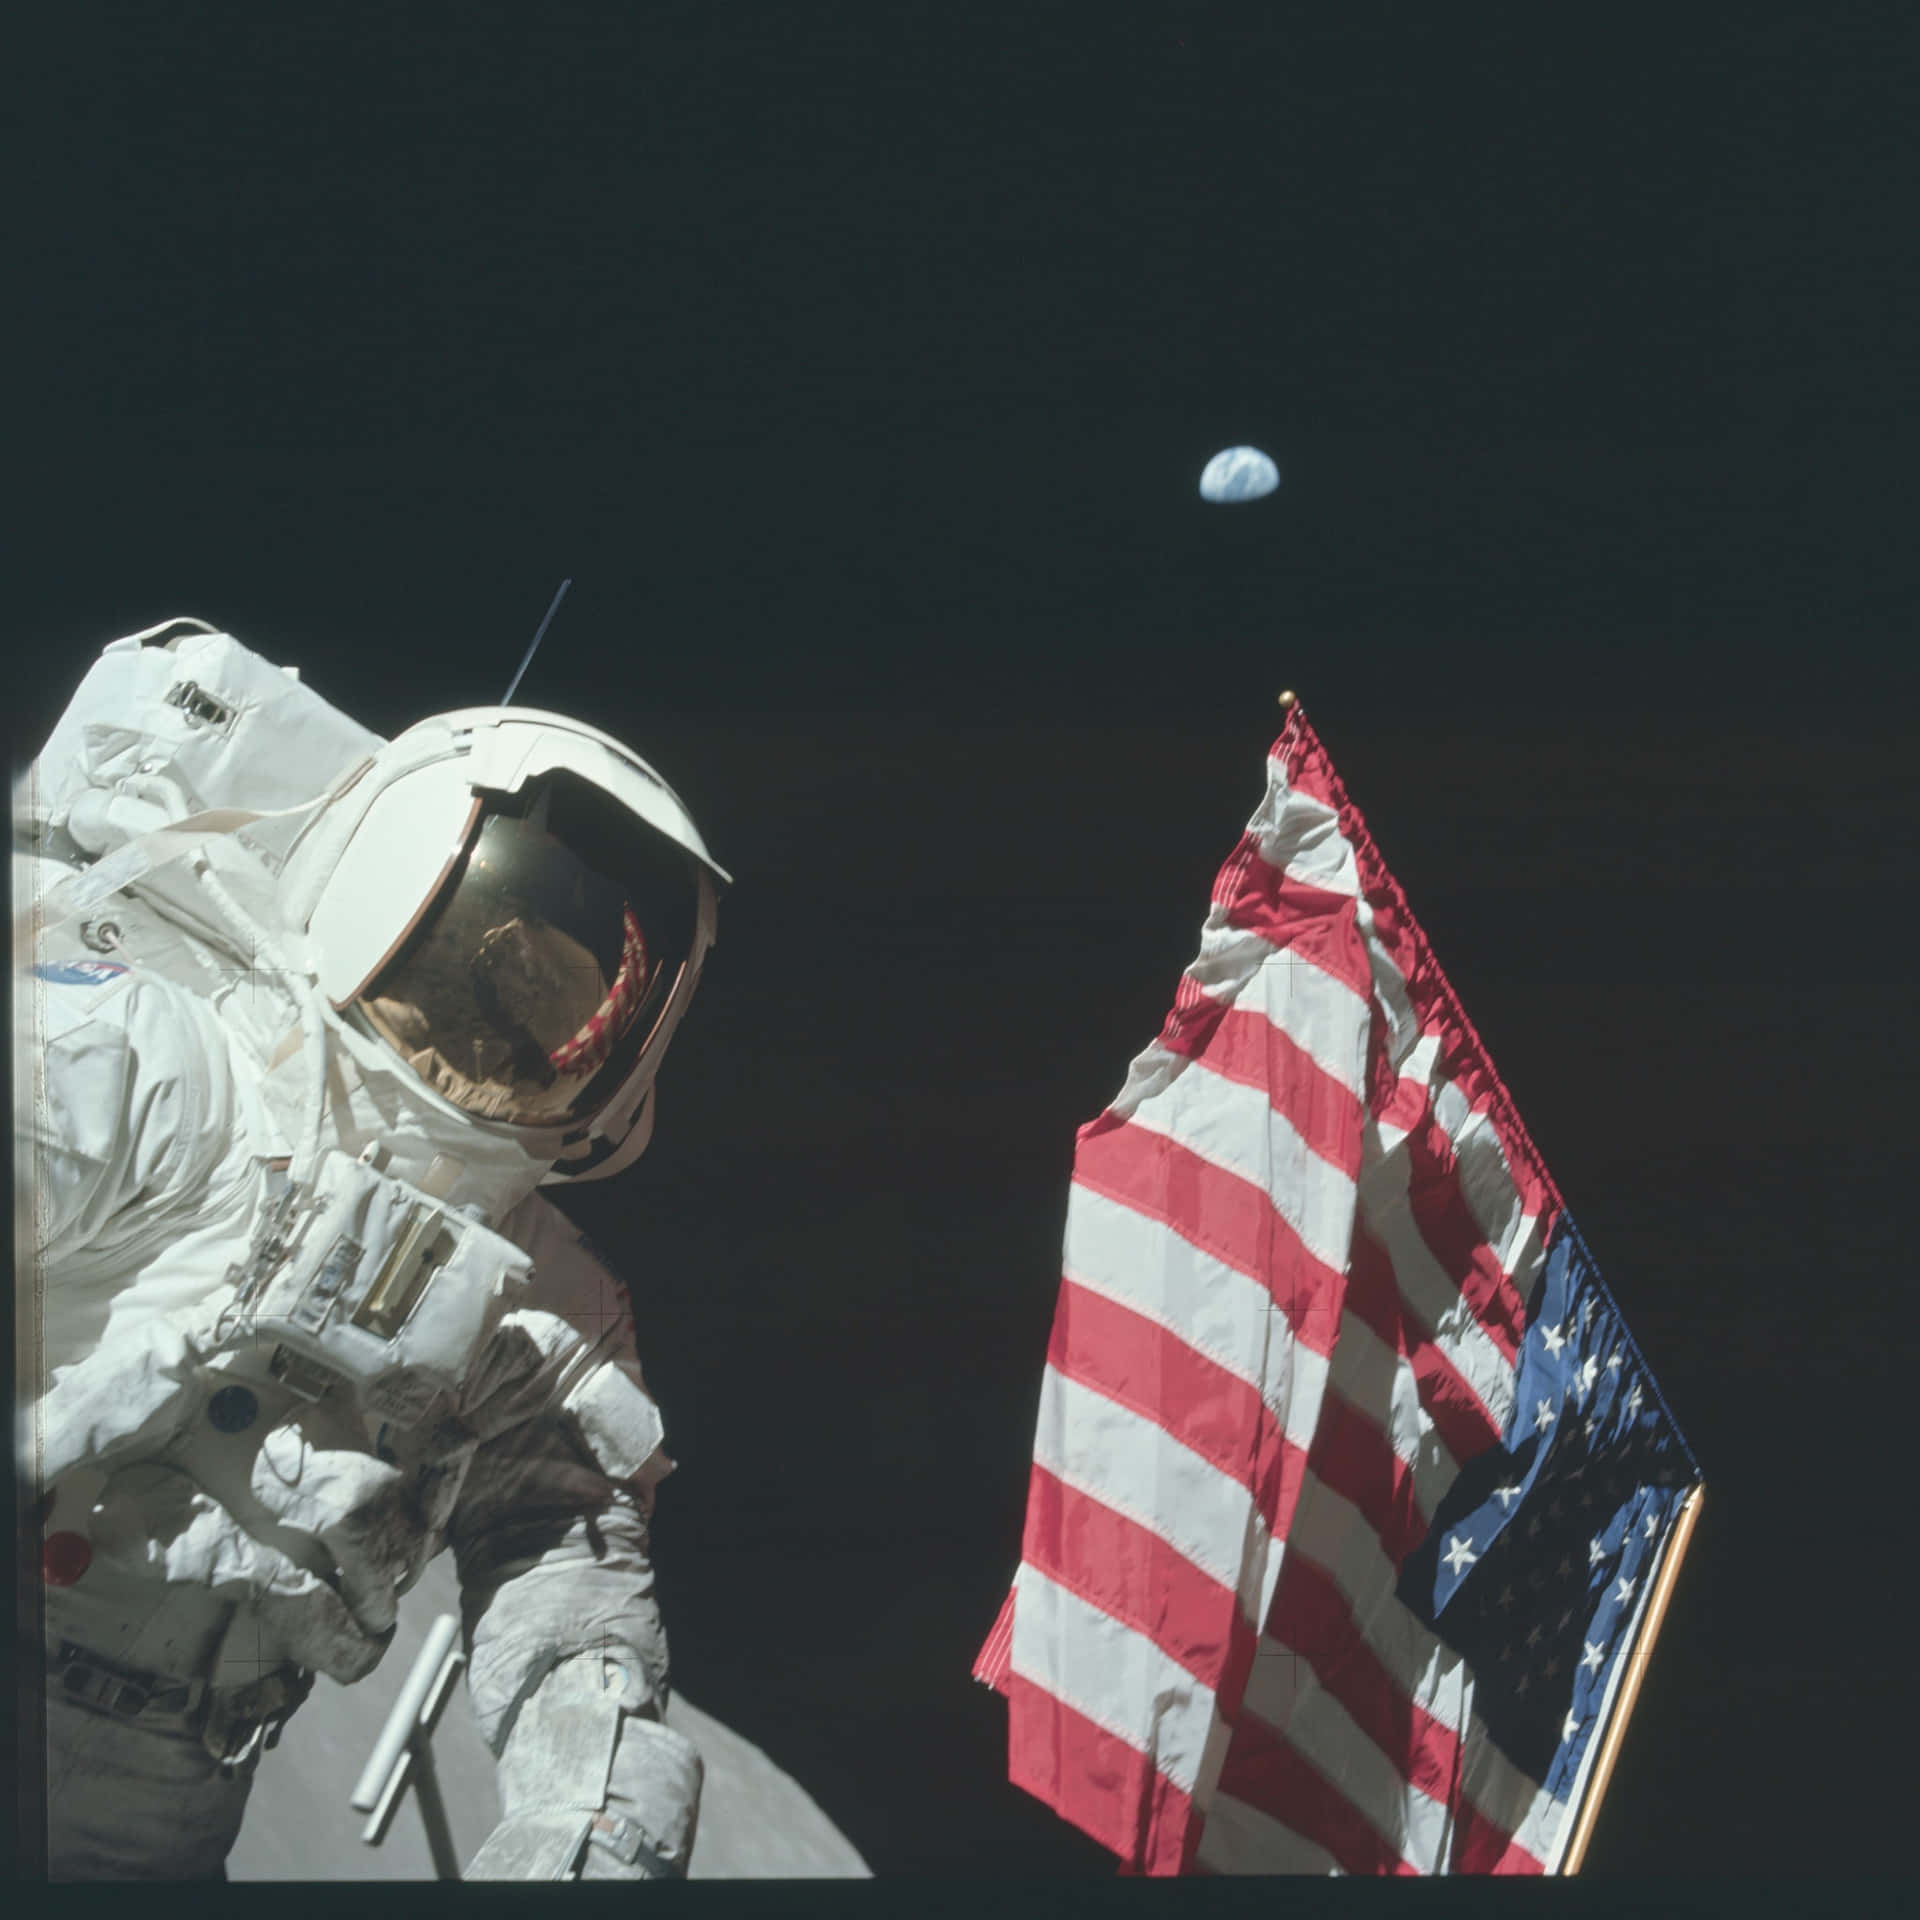 An Astronaut Is Standing Next To An American Flag